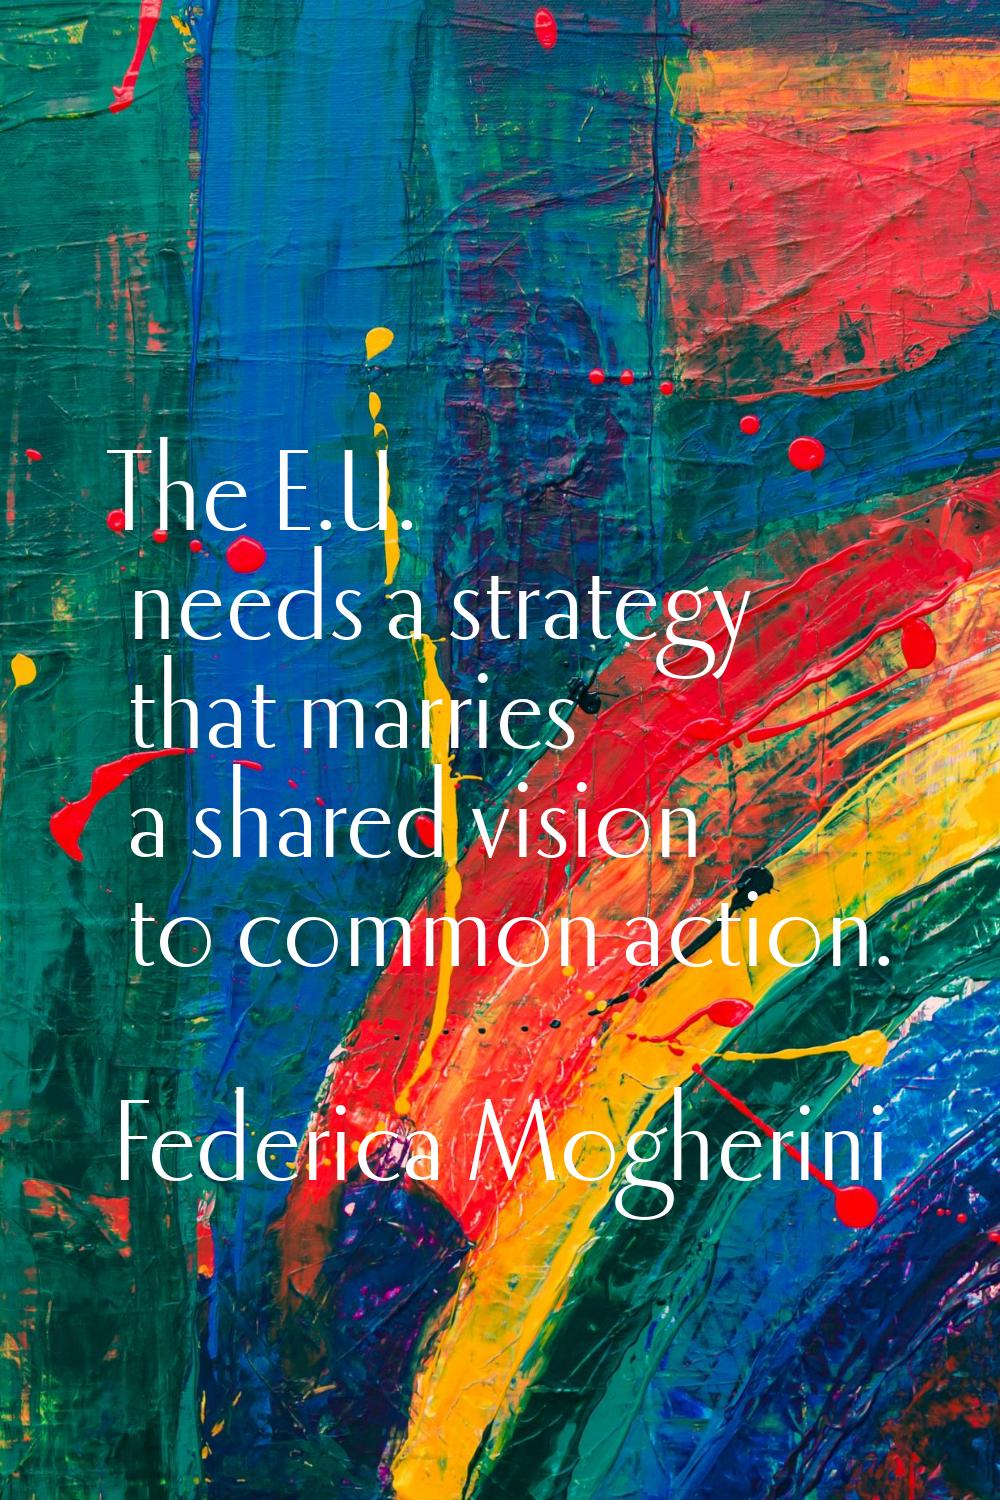 The E.U. needs a strategy that marries a shared vision to common action.